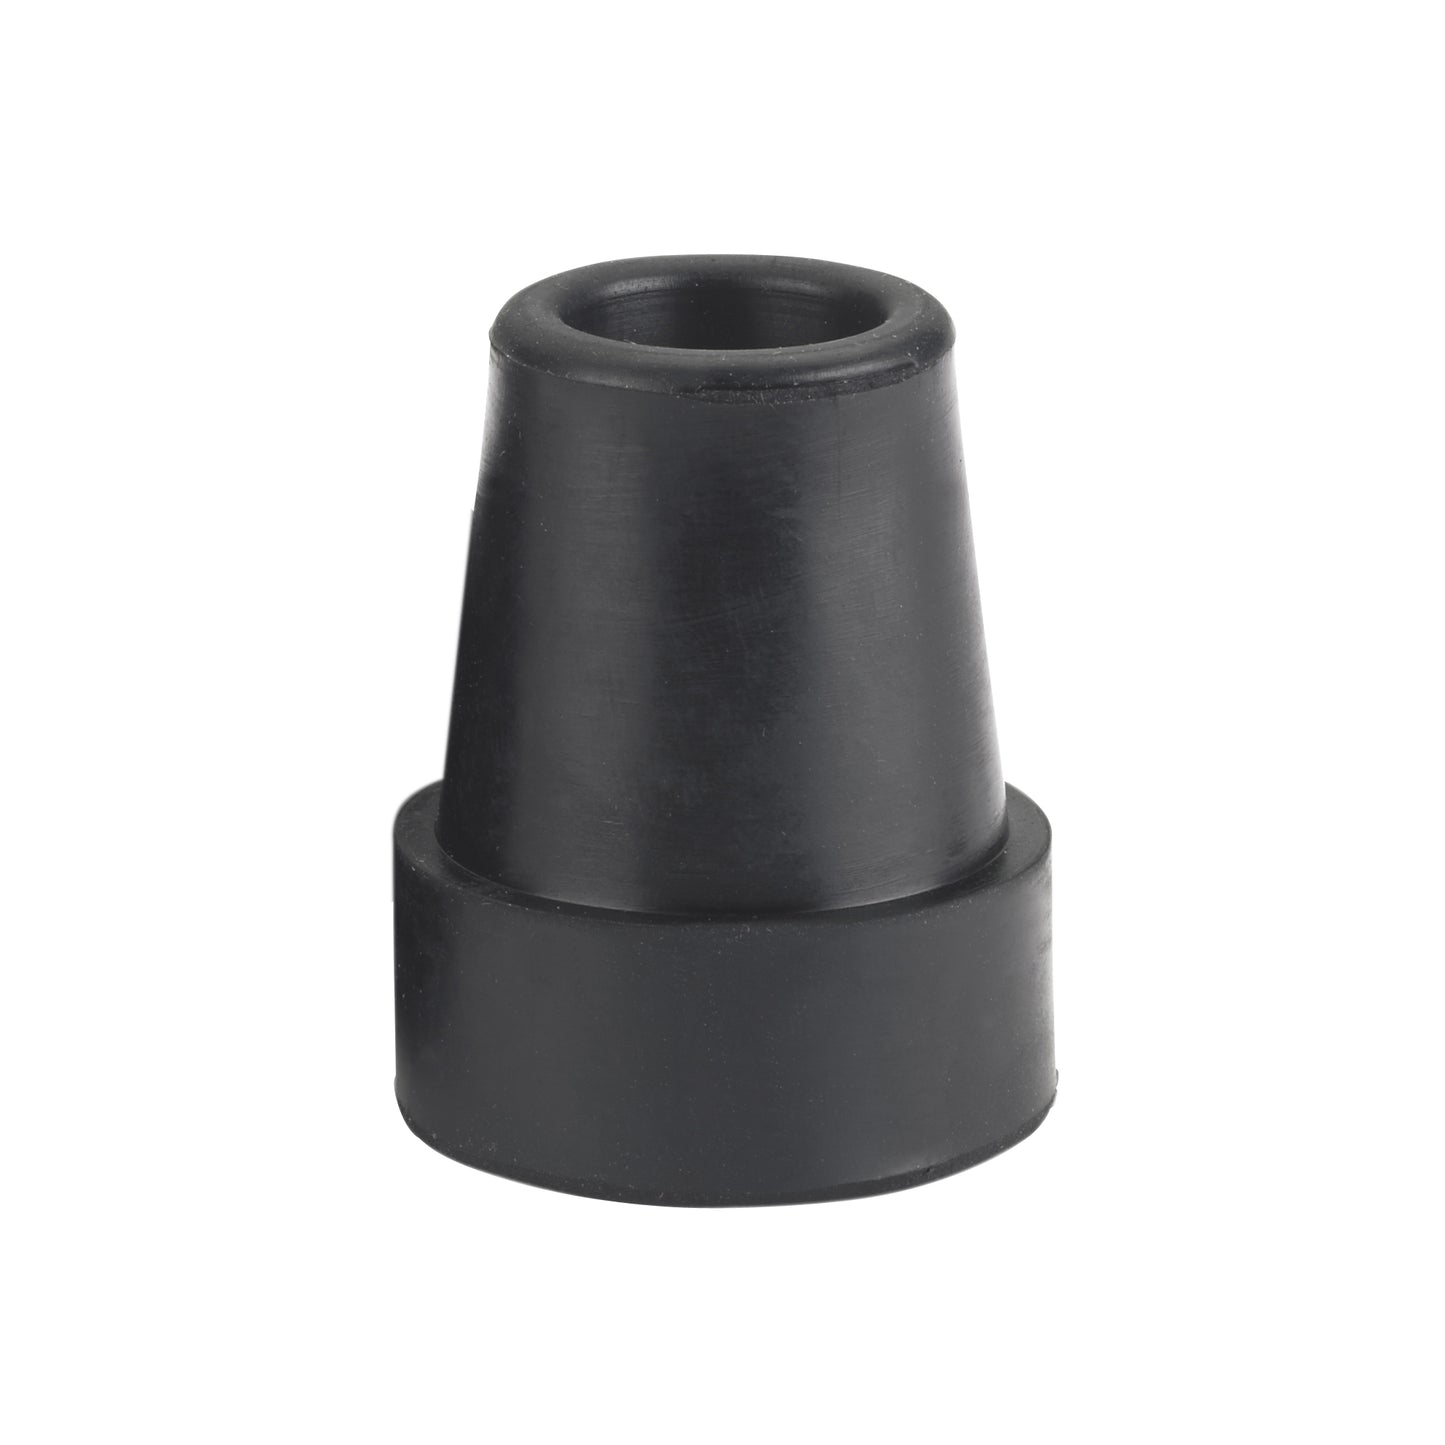 Small Base Quad Cane Tip, Pack of 4